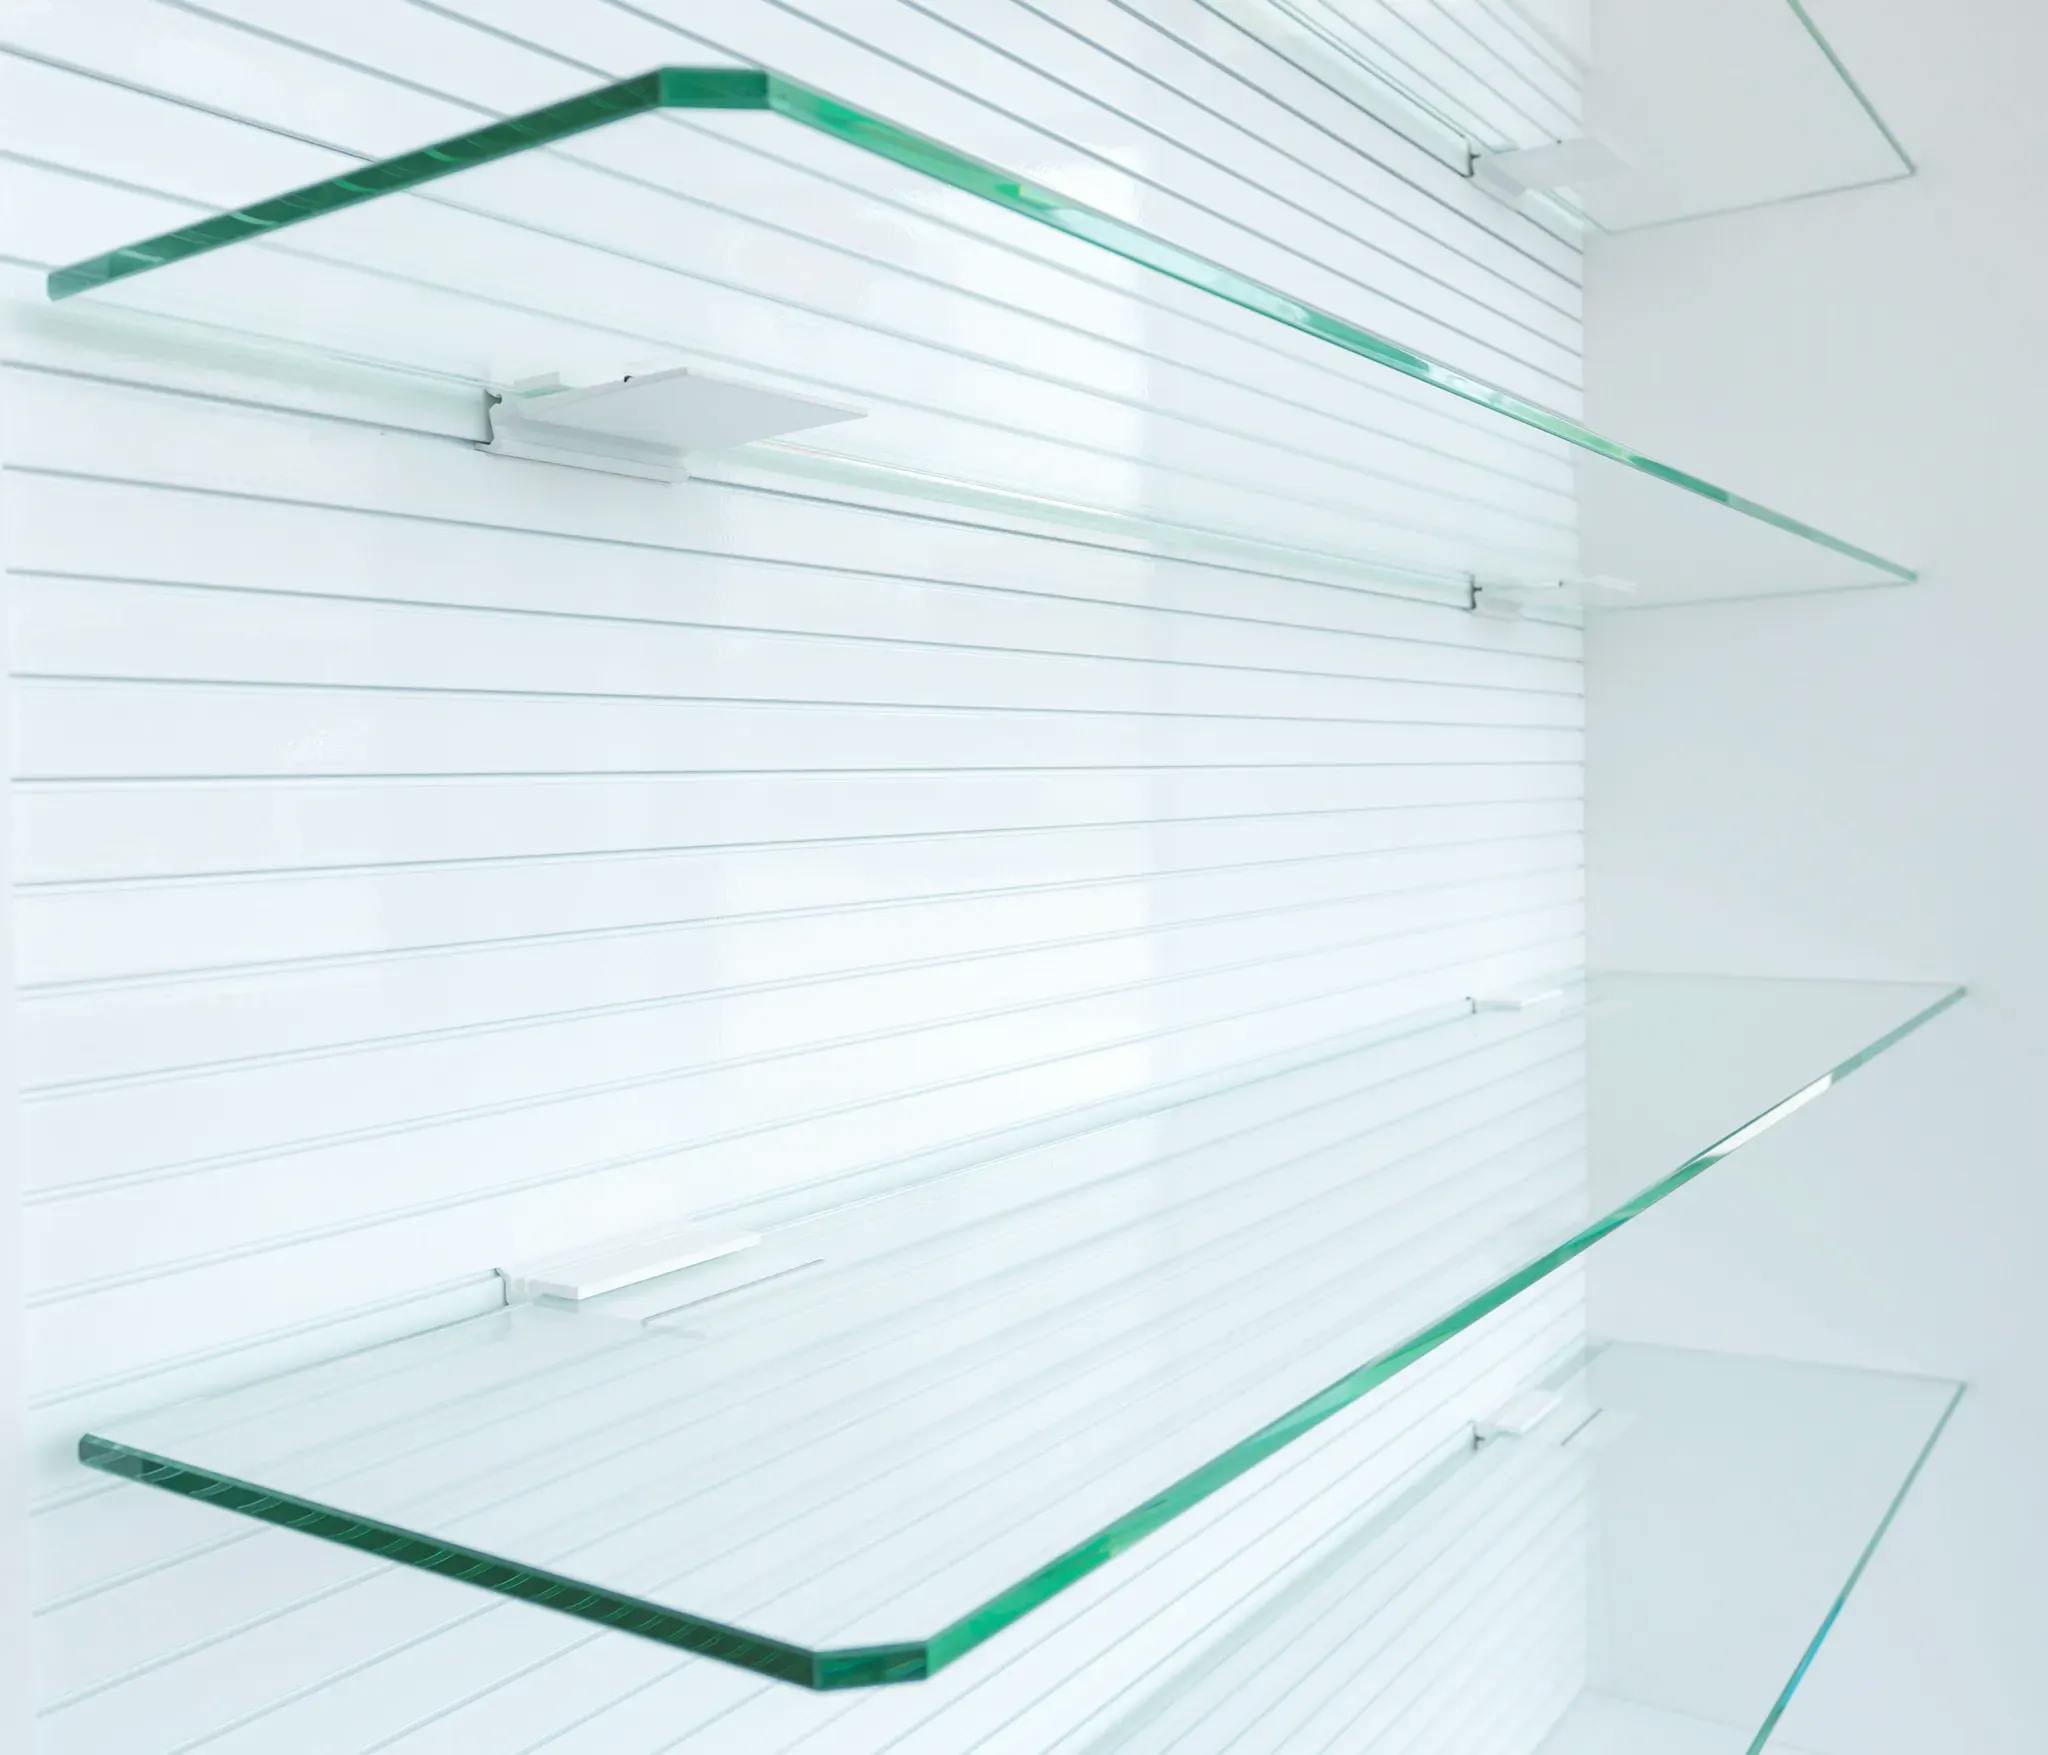 Two glass shelves with rounded corners, arranged for a business or pharmacy, mounted on a white wall